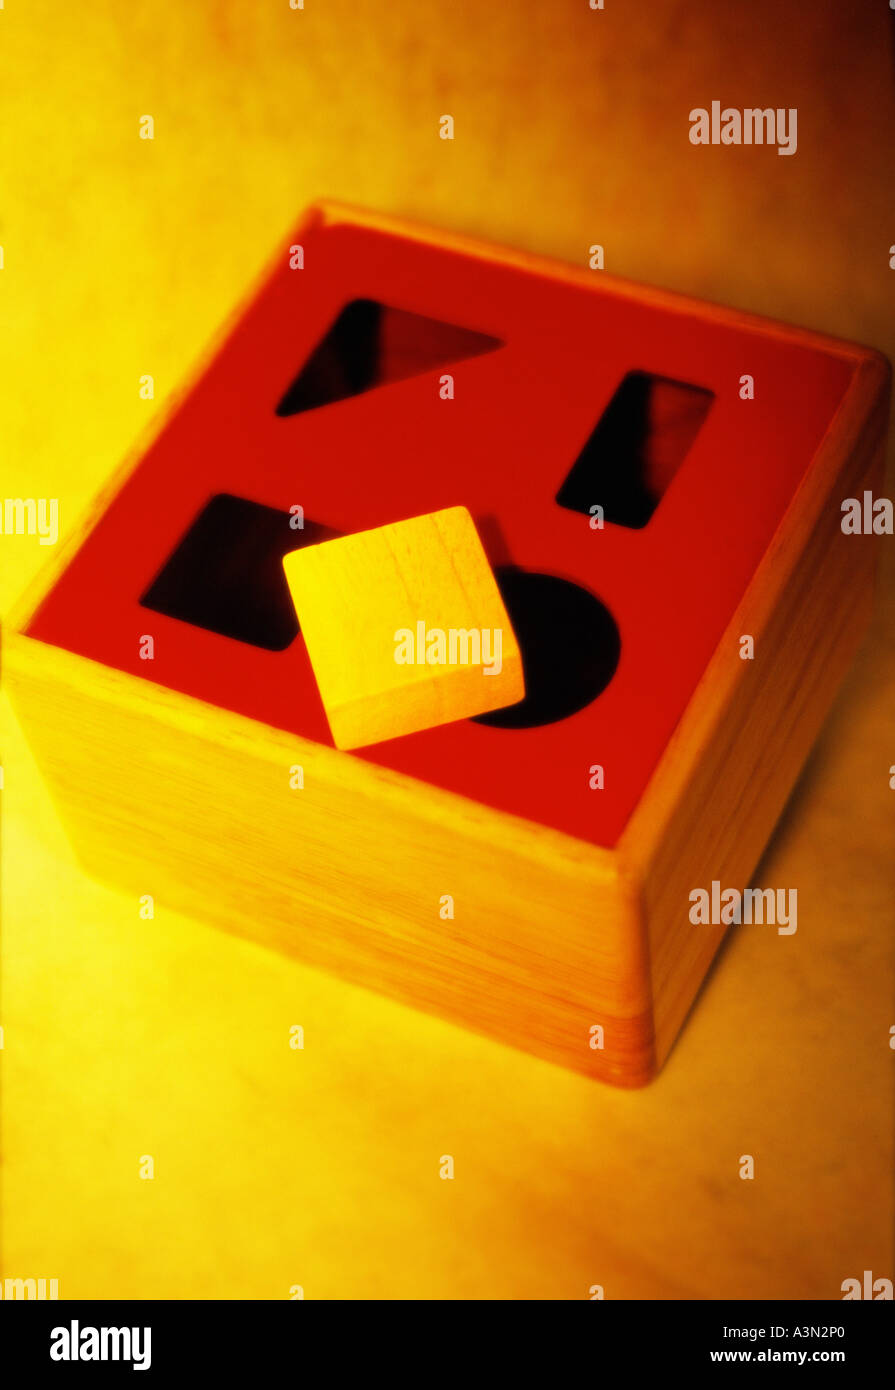 Square Peg In A Round Hole Stock Photo